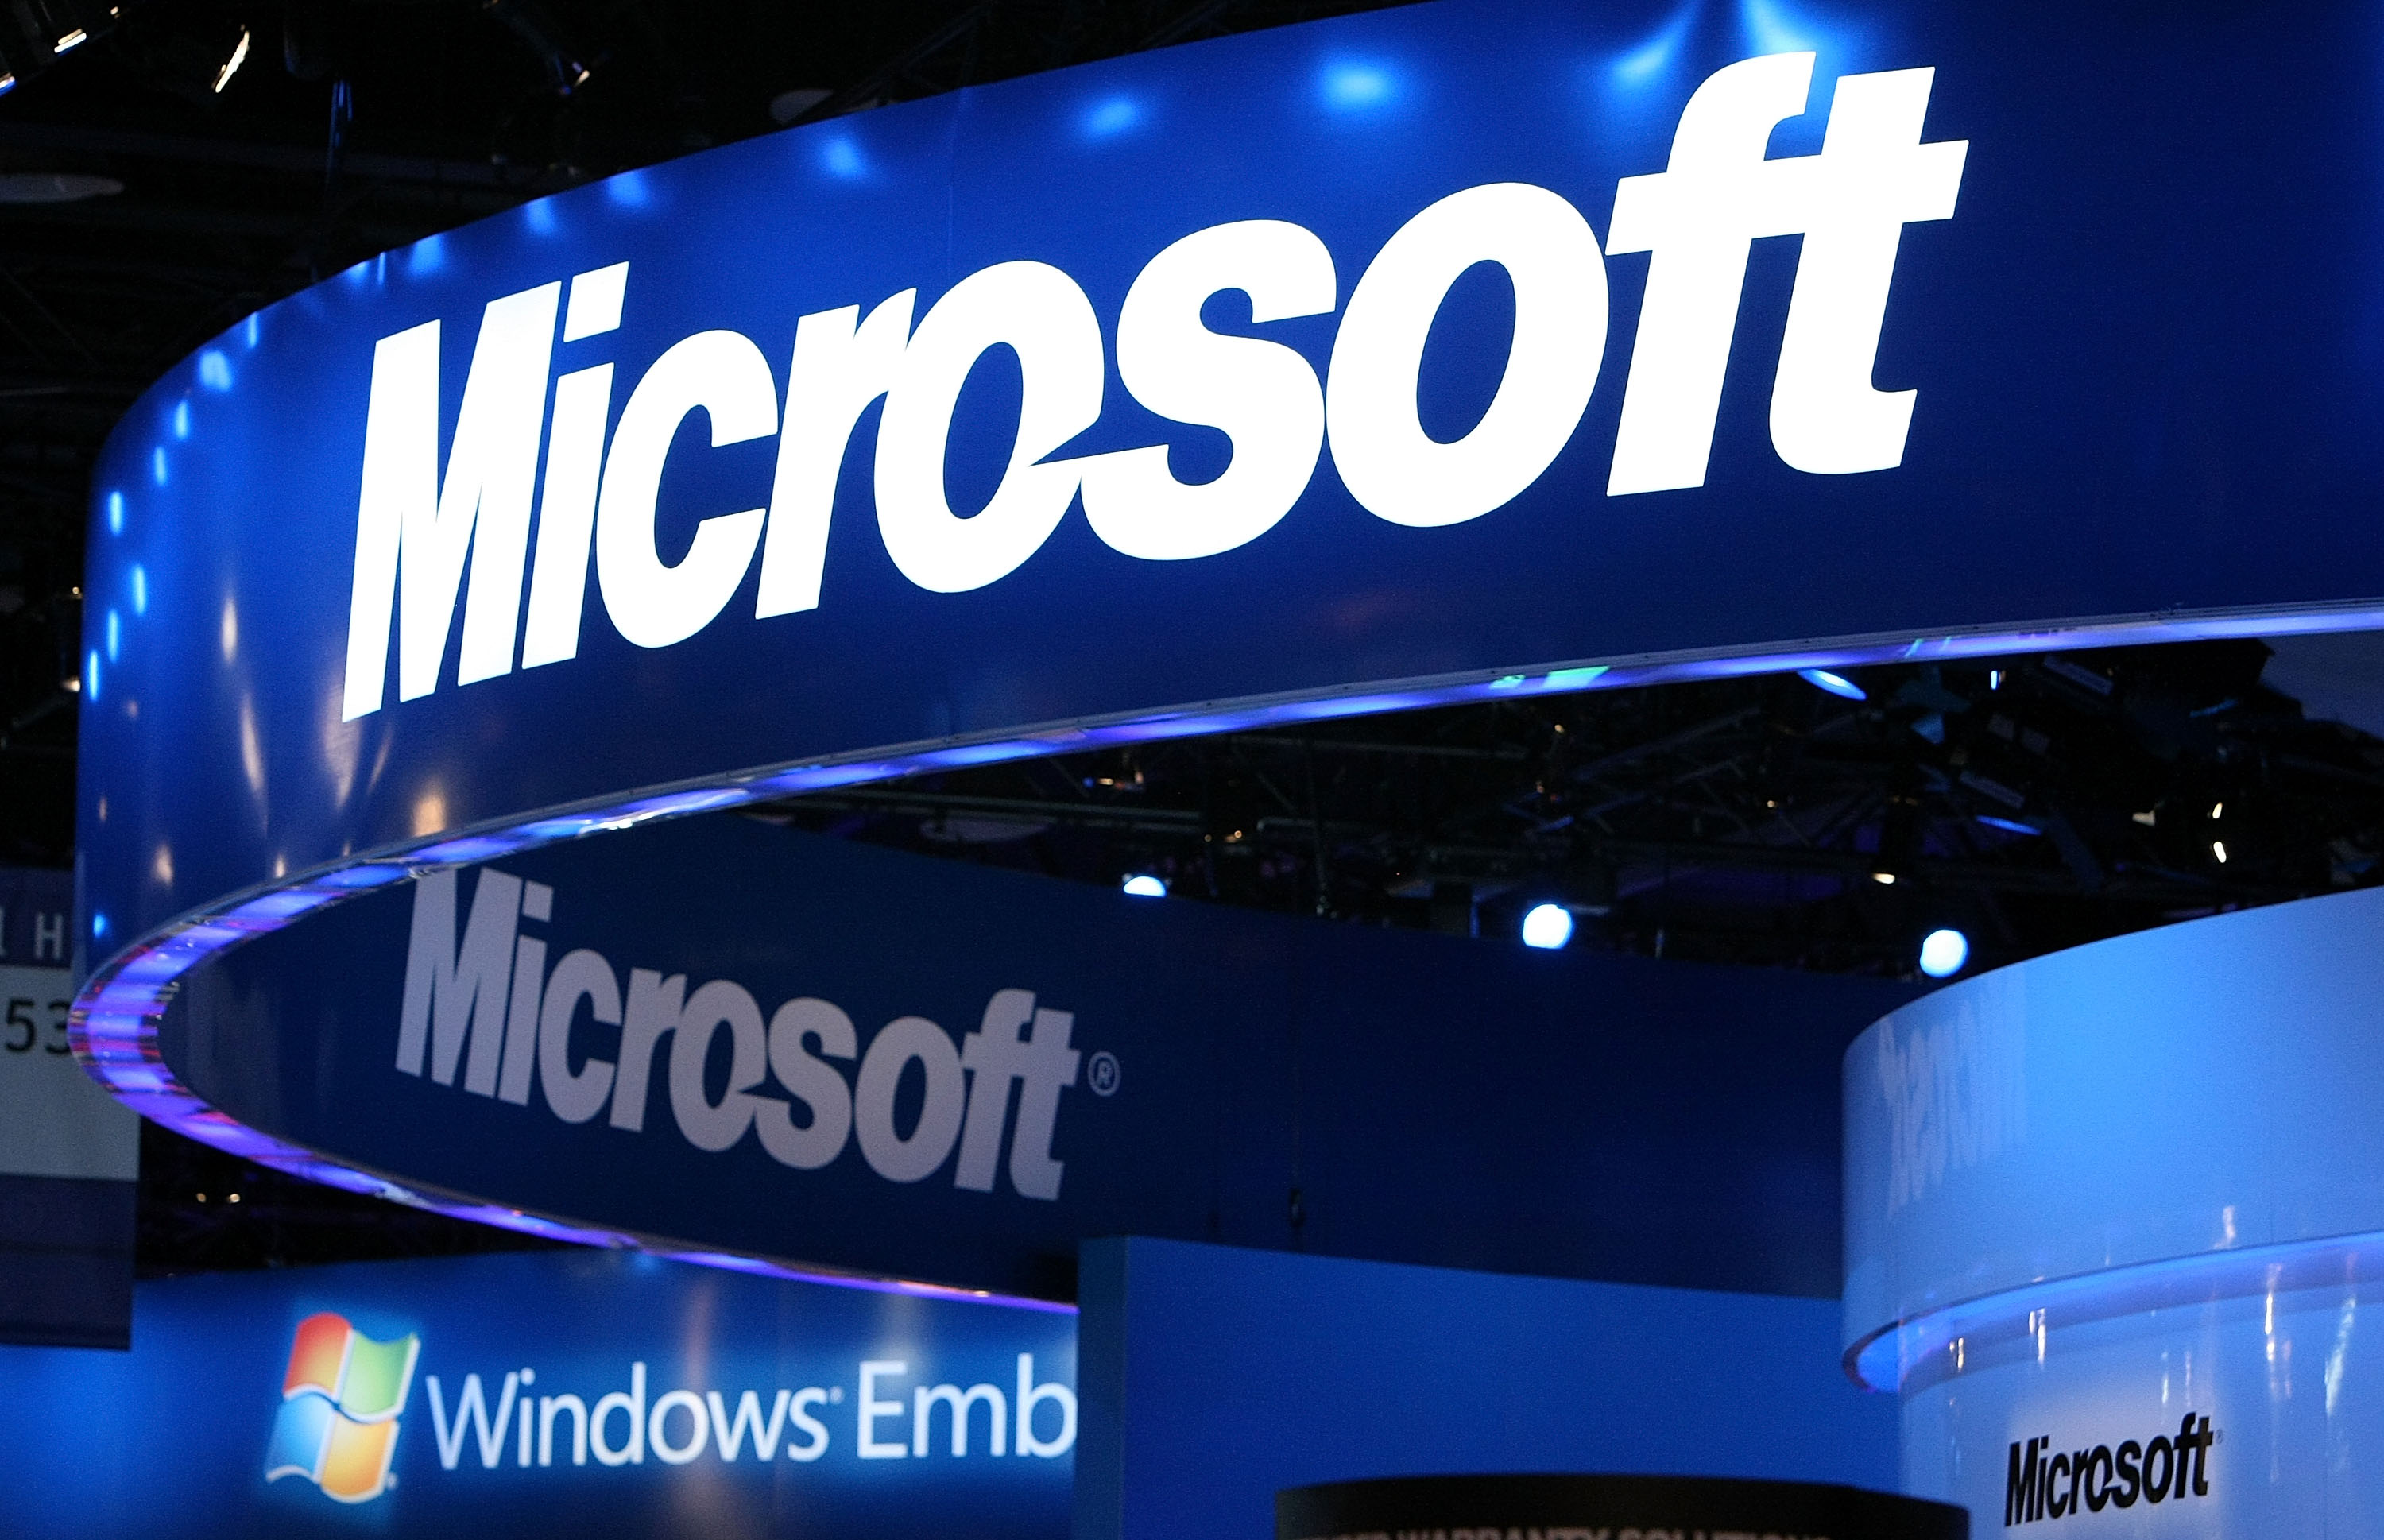 The Microsoft logo is displayed over the Microsoft booth at the 2010 International Consumer Electronics Show at the Las Vegas Hilton January 7, 2010 in Las Vegas, Nevada. (Justin Sullivan&mdash;Getty Images)